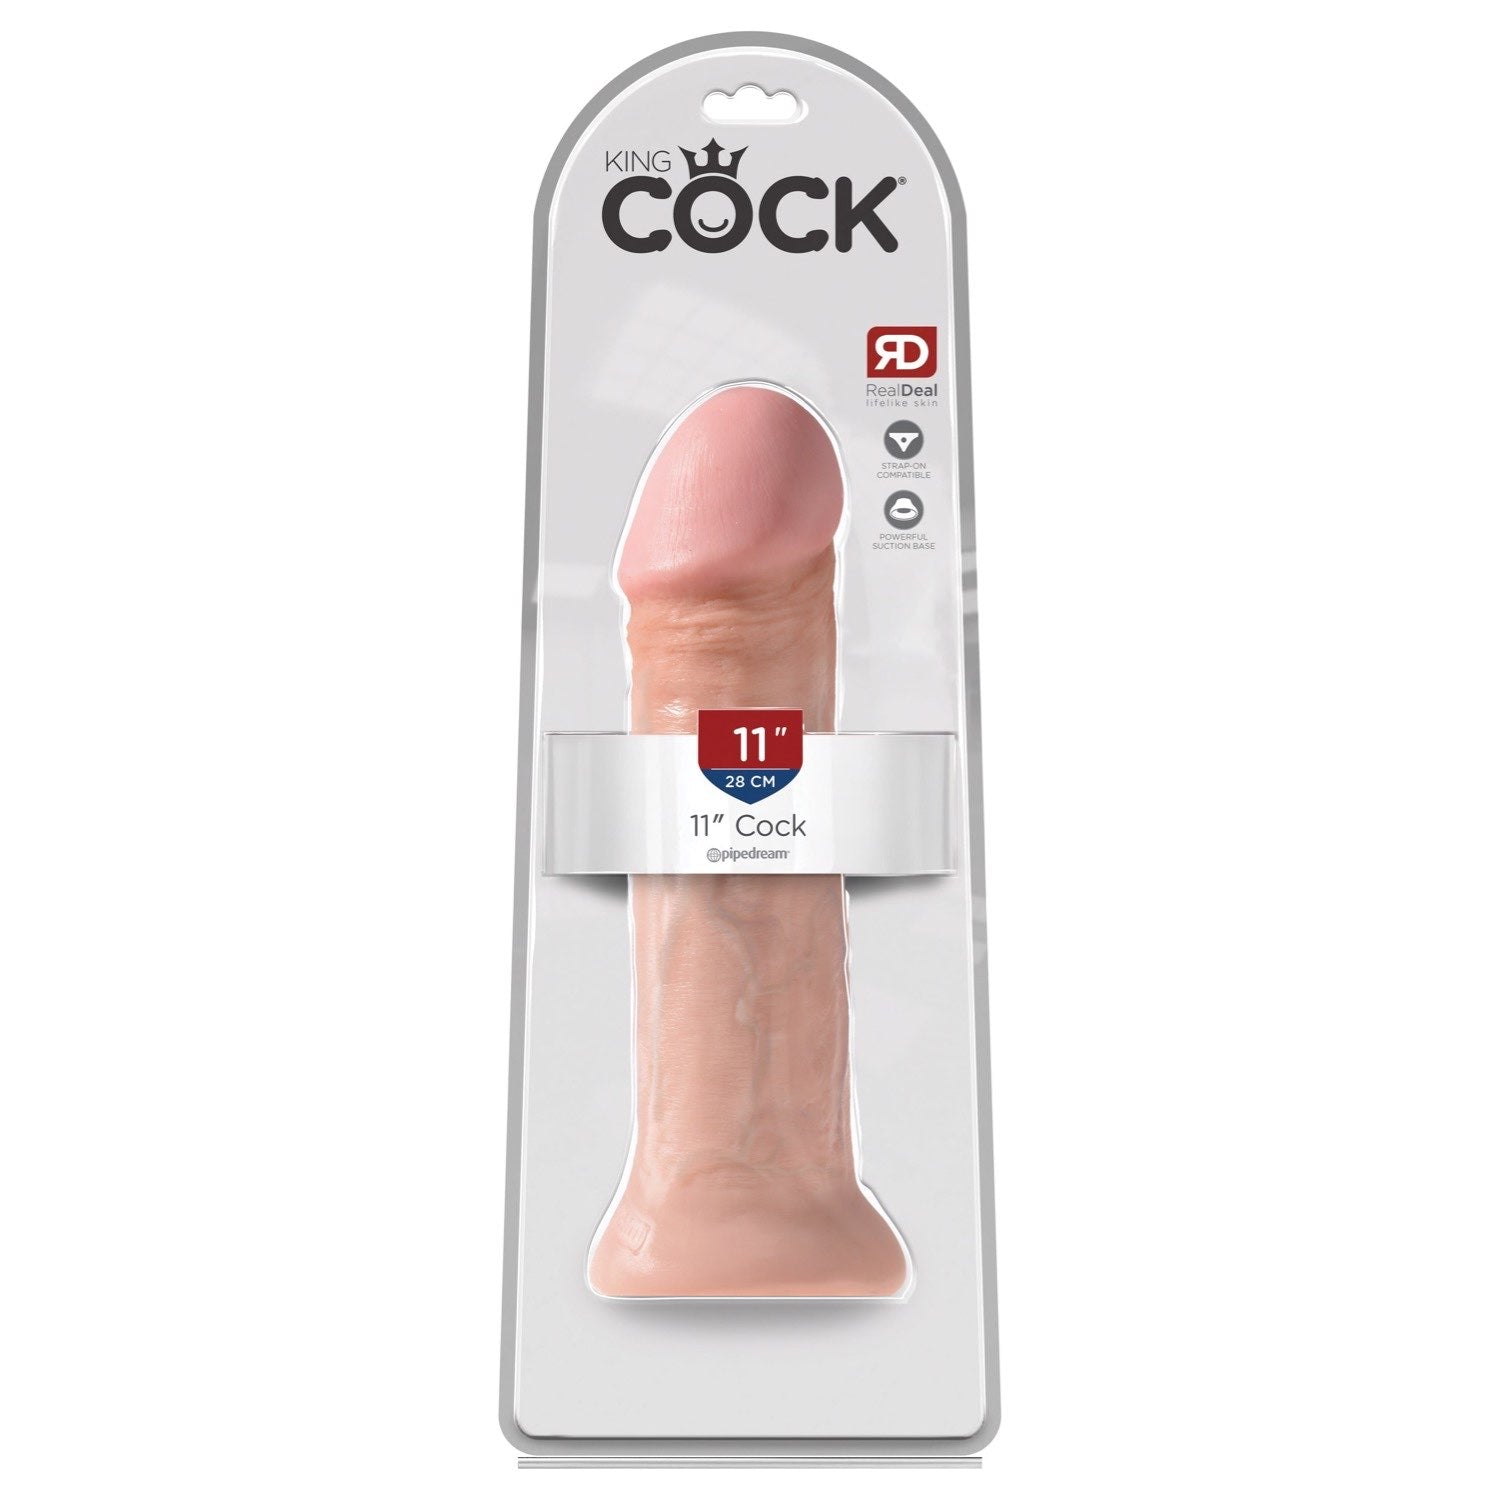 King Cock 11&quot; Cock - Flesh 28 cm Dong by Pipedream